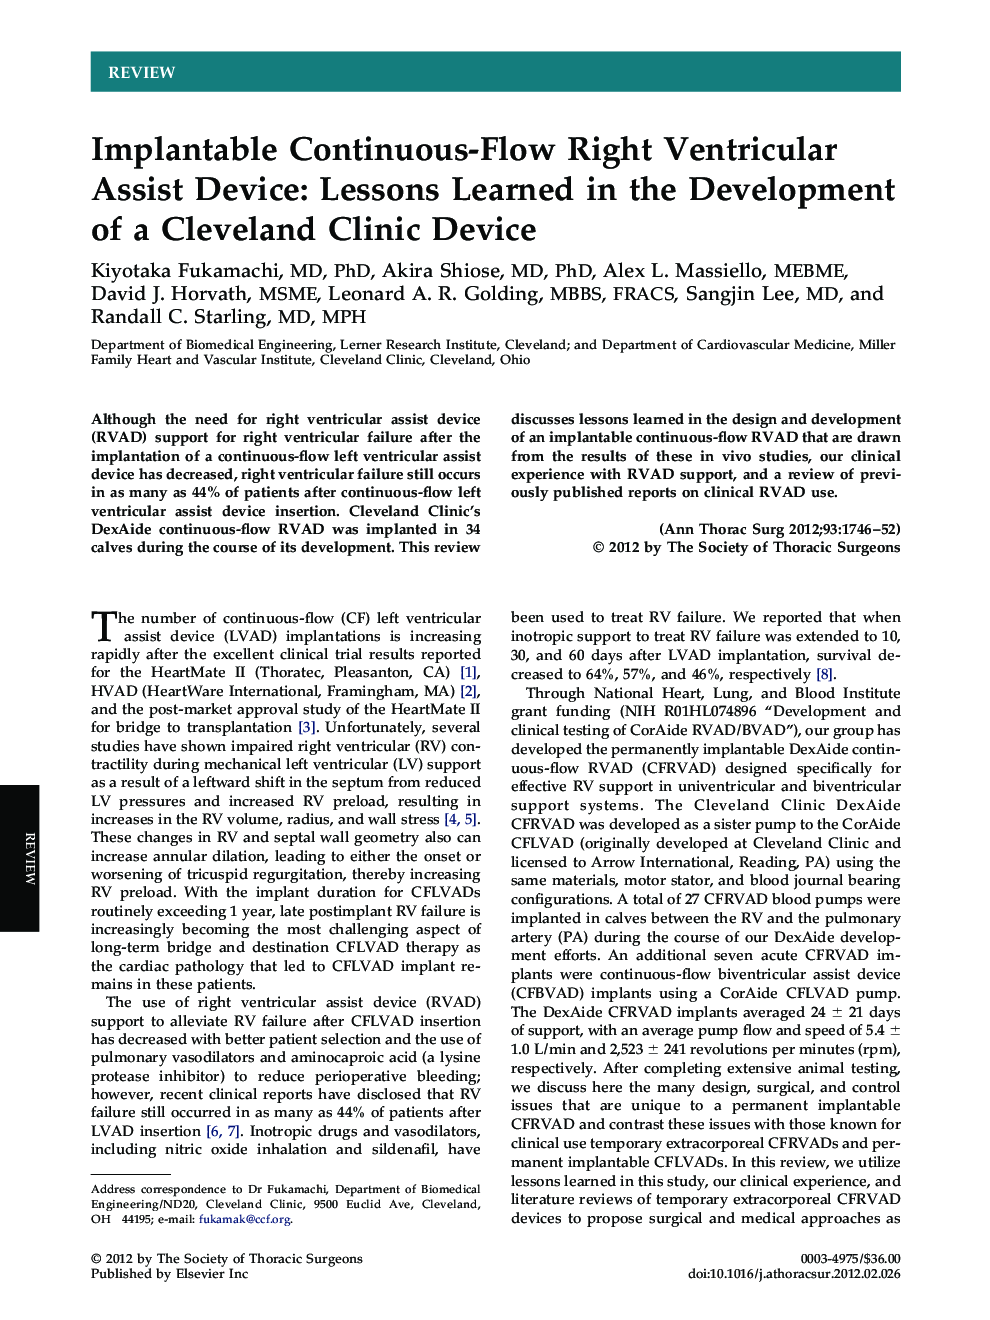 Implantable Continuous-Flow Right Ventricular Assist Device: Lessons Learned in the Development of a Cleveland Clinic Device